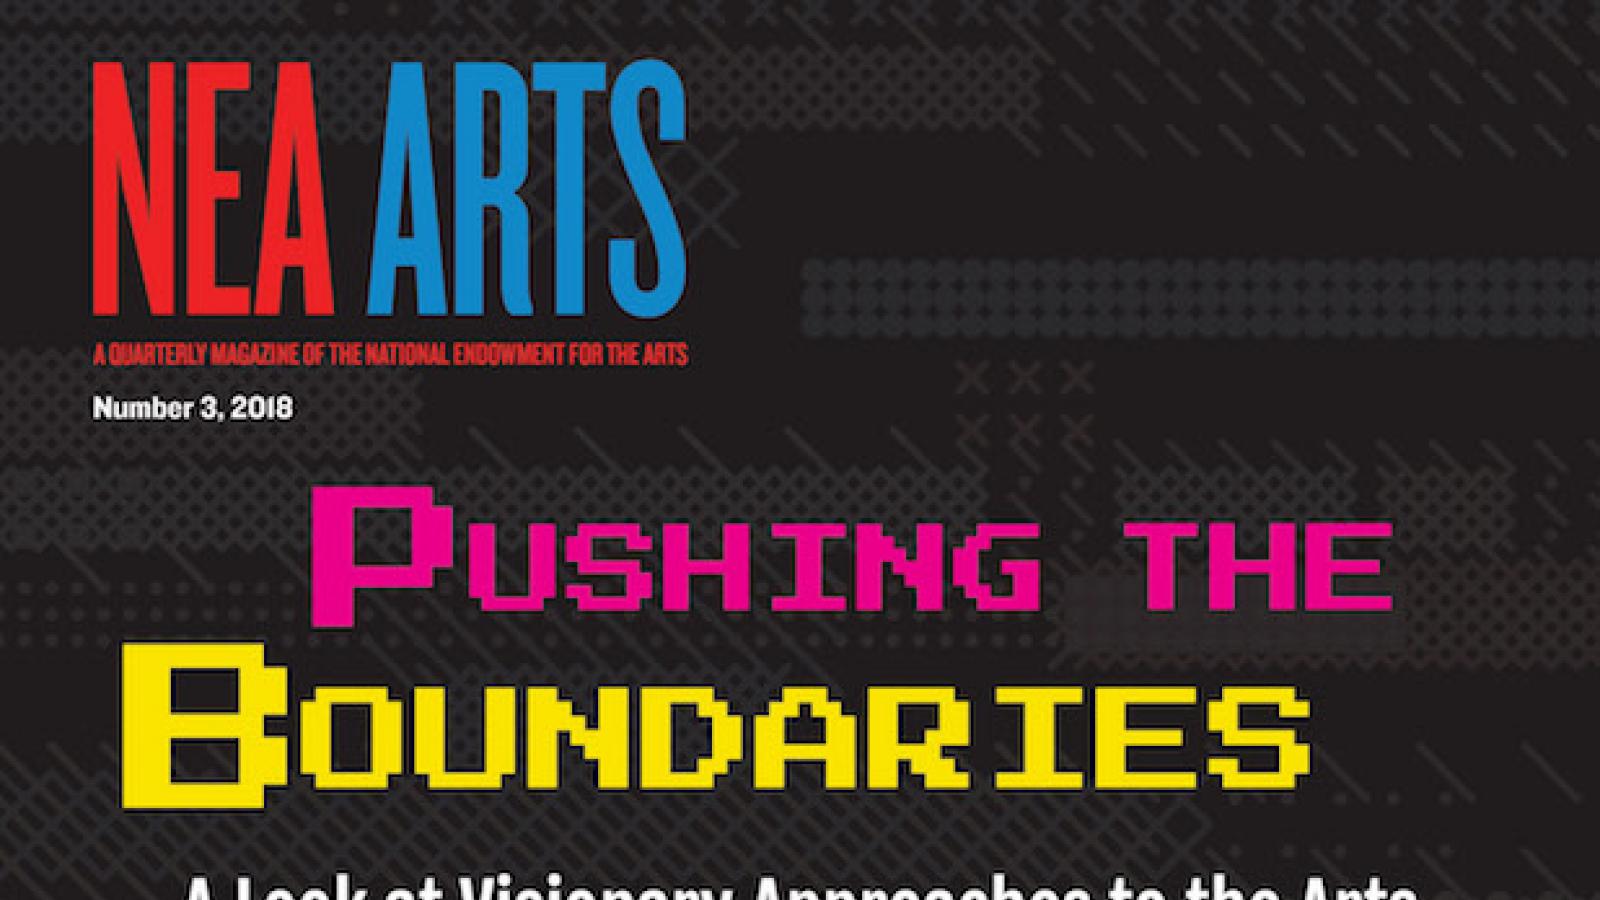 cover of NEA Arts that says Pushing the Boundaries: Visionary Approaches to the Arts